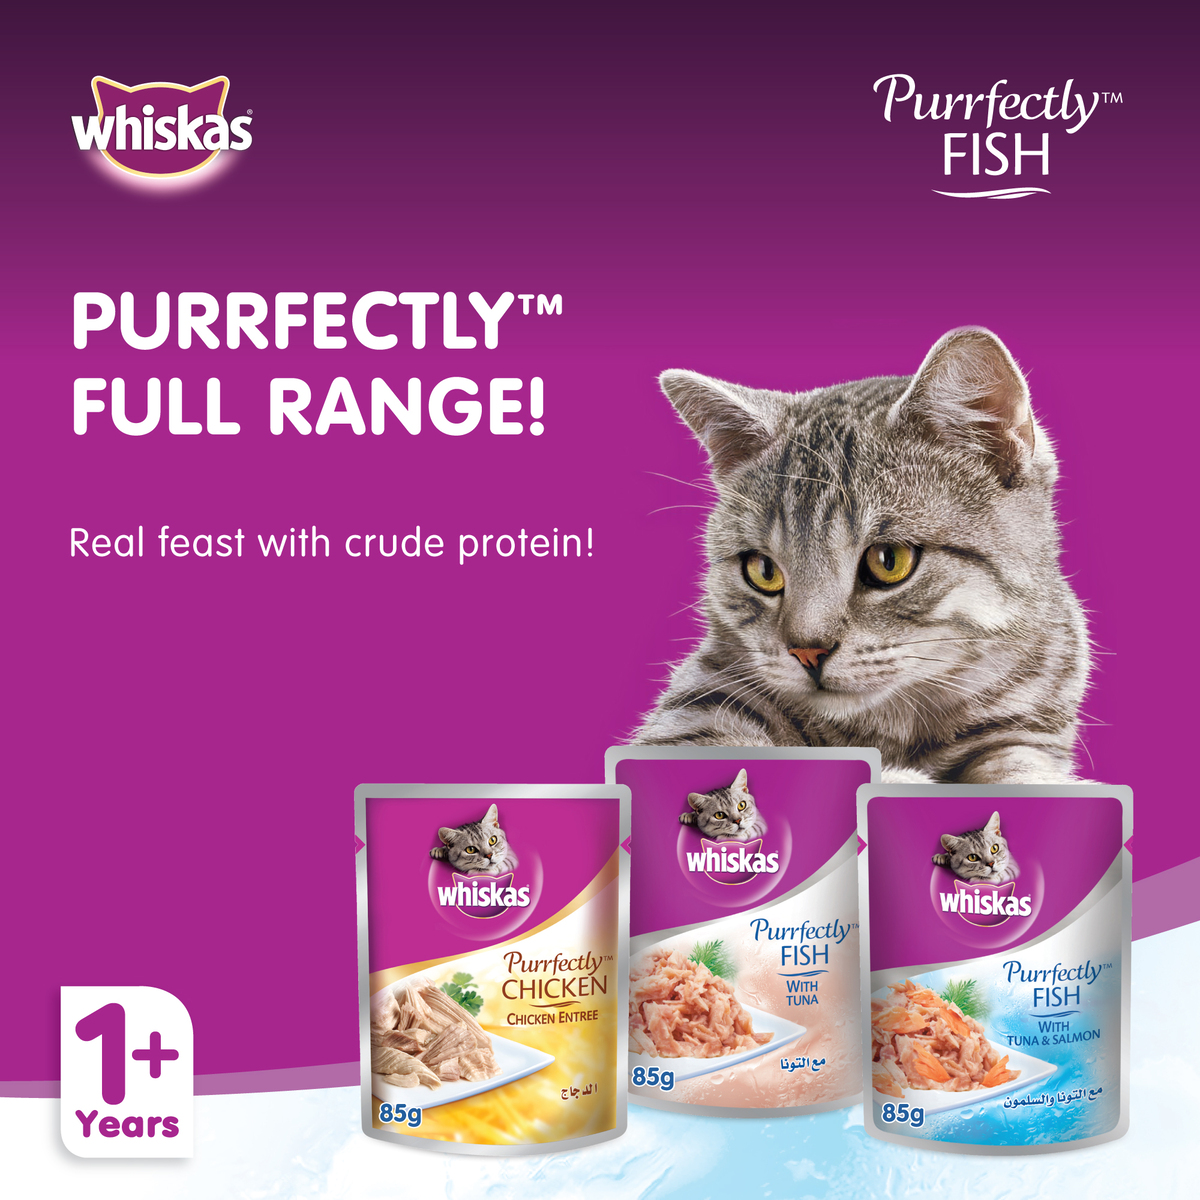 Whiskas Purrfectly Fish with Tuna & Salmon Wet Cat Food for Adult Cats 85g